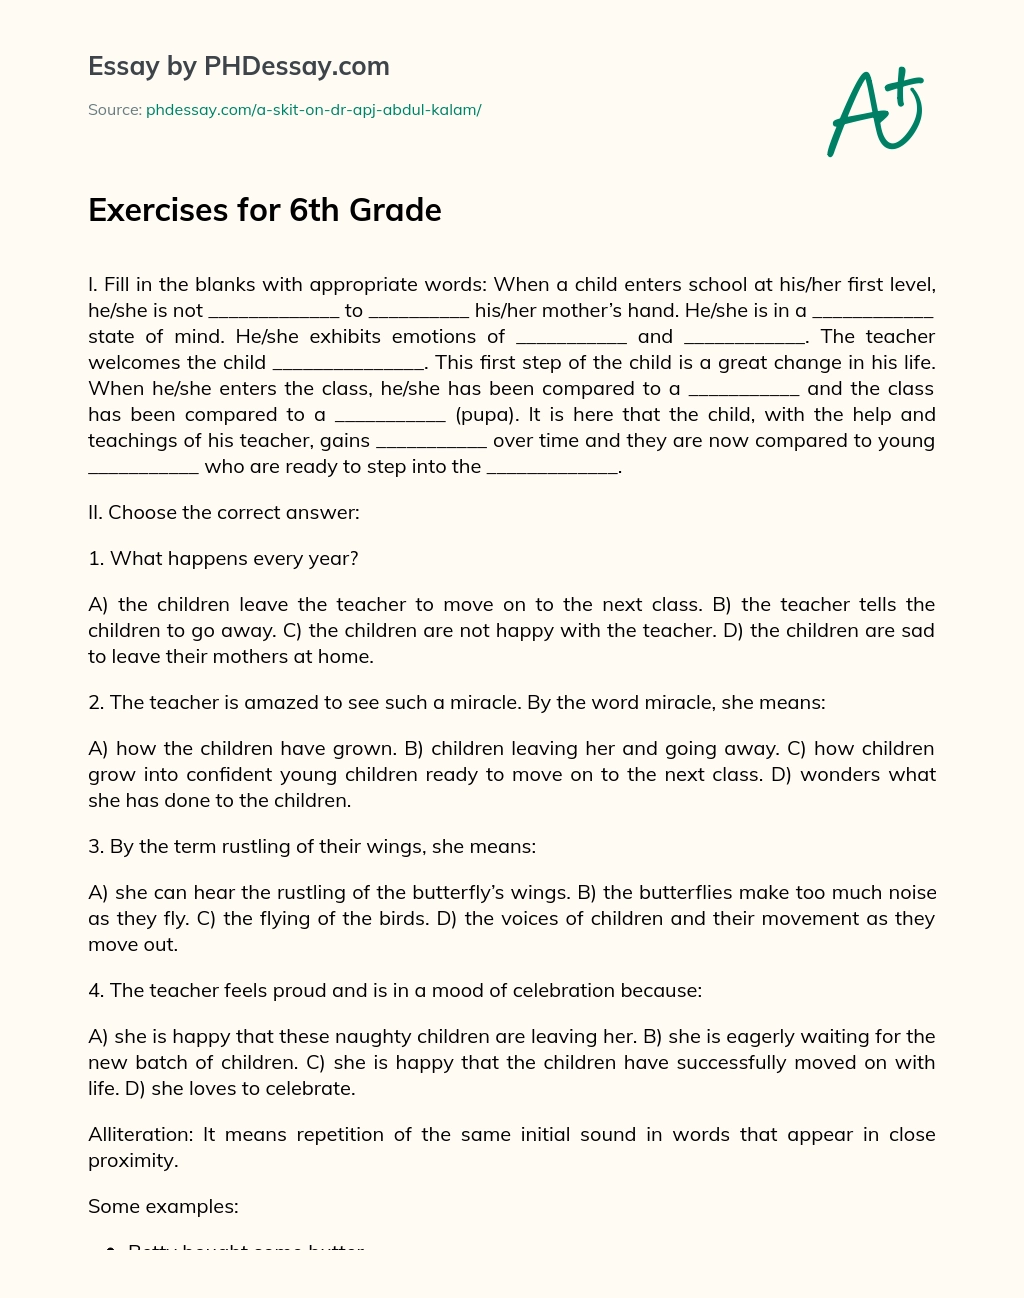 Exercises for 6th Grade essay